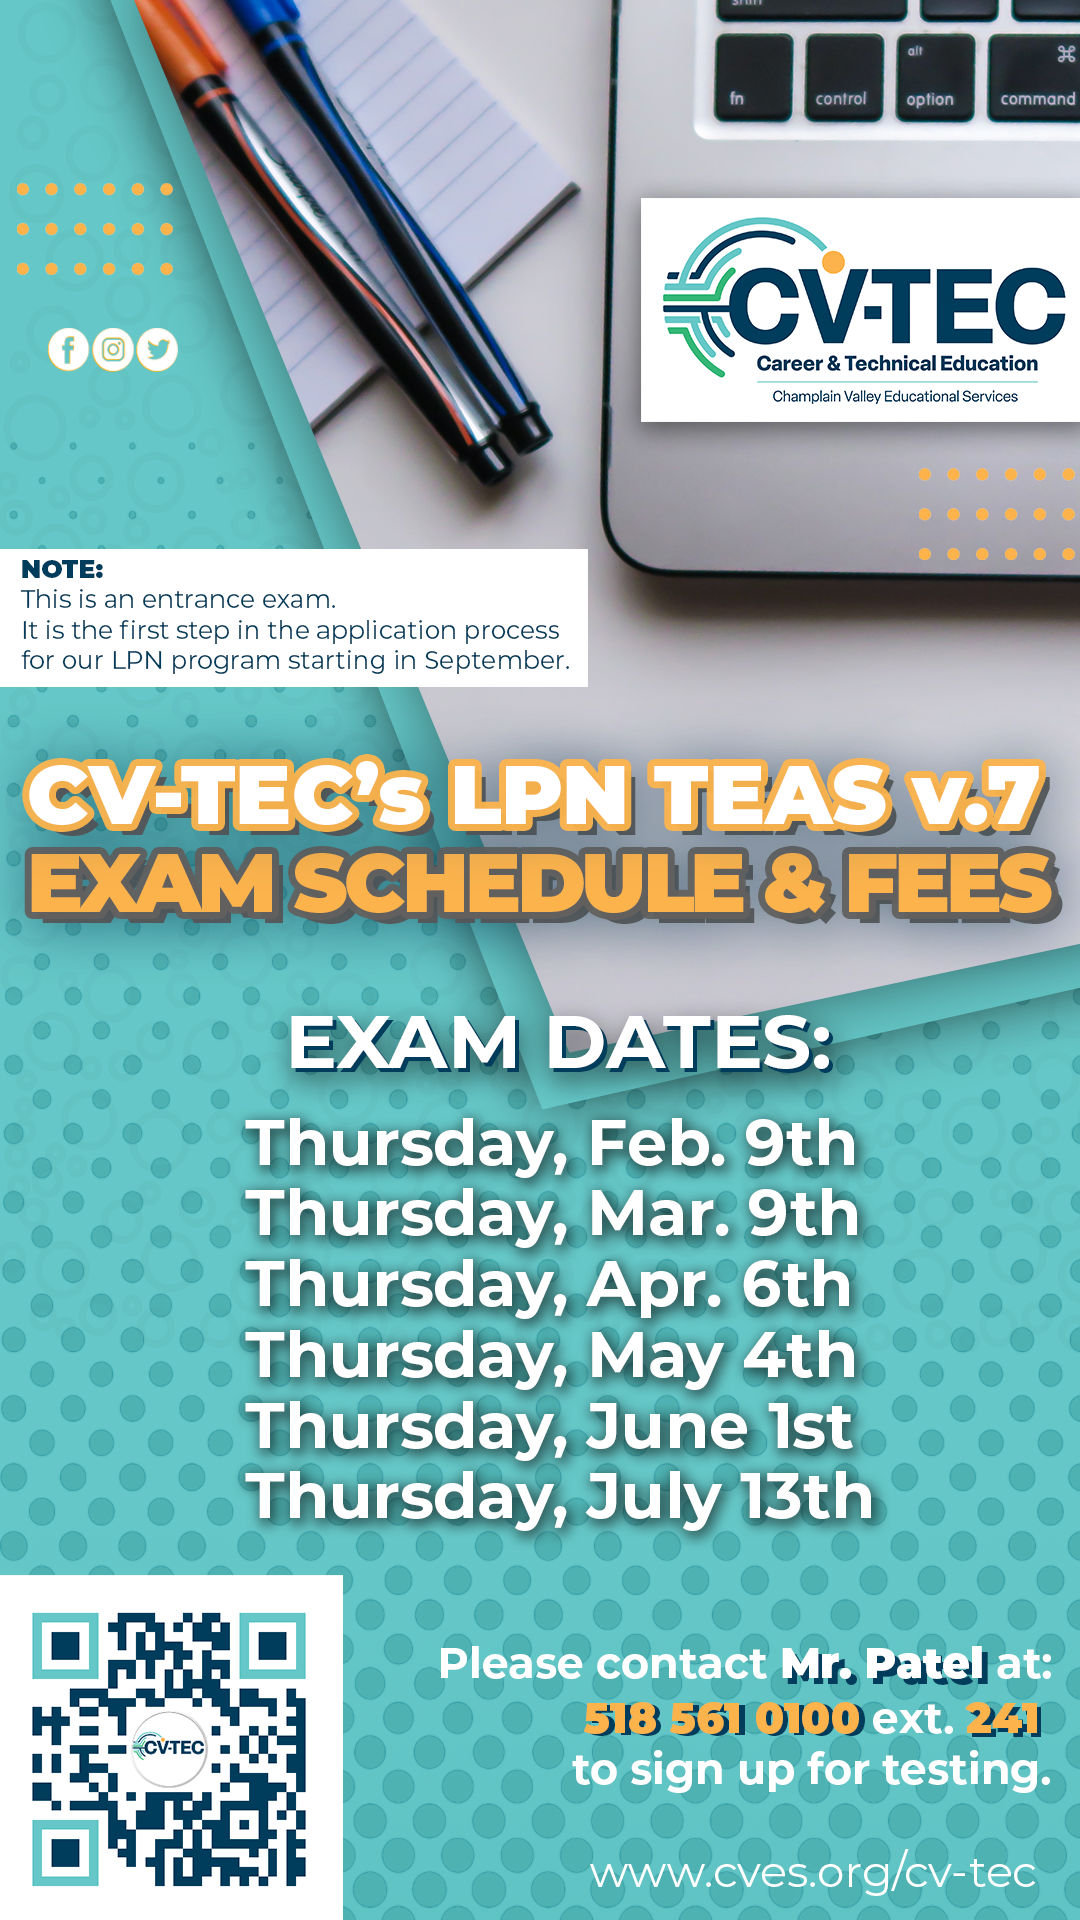 Image of Facebook graphic for the CV-TEC's LPN TEAS v.7 Exam Schedule & Fees